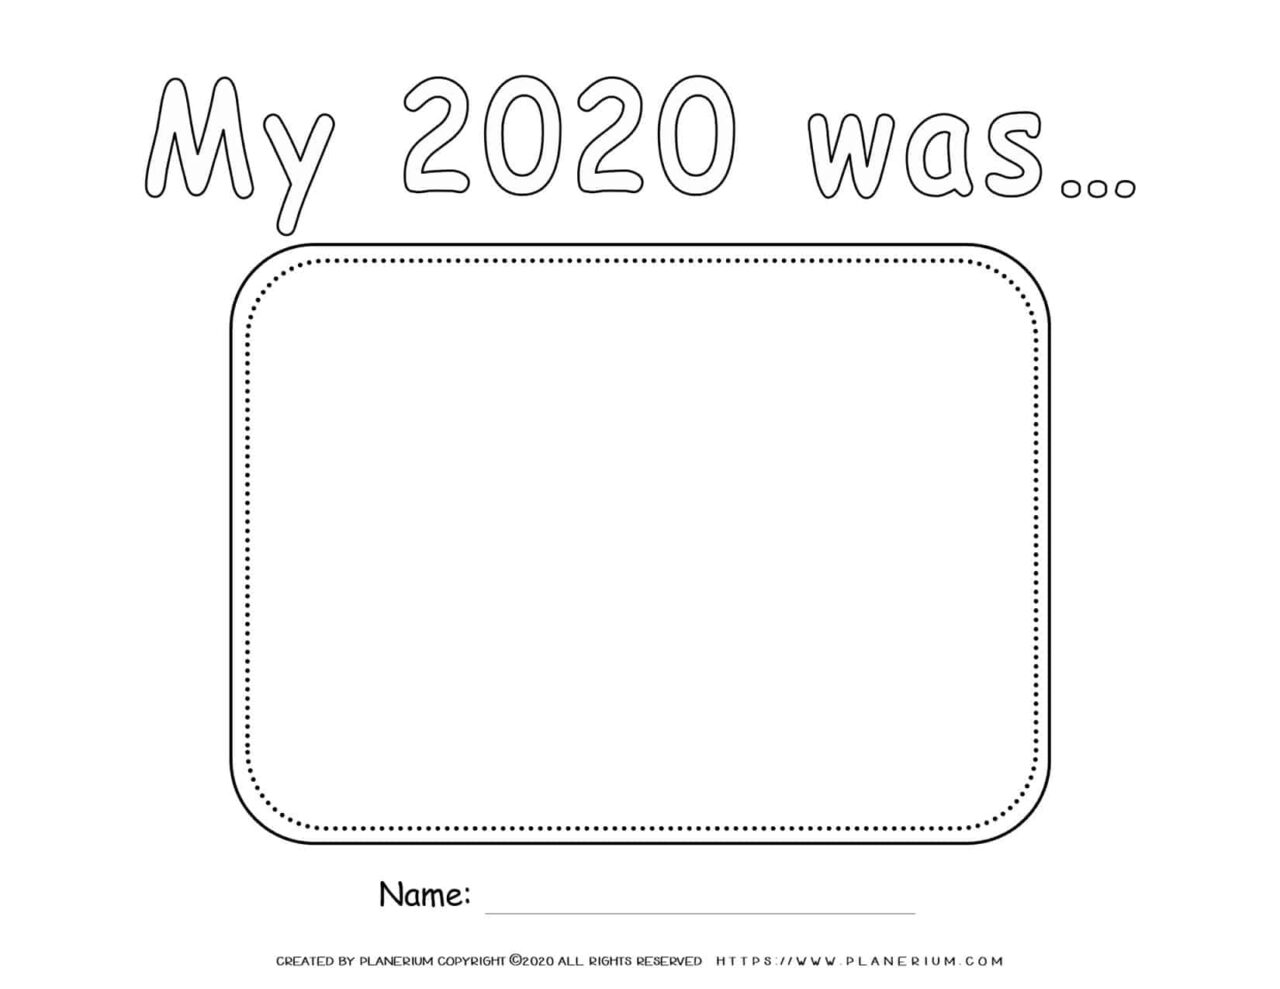 Self Reflection 2020 - Worksheet - About My Year | Planerium